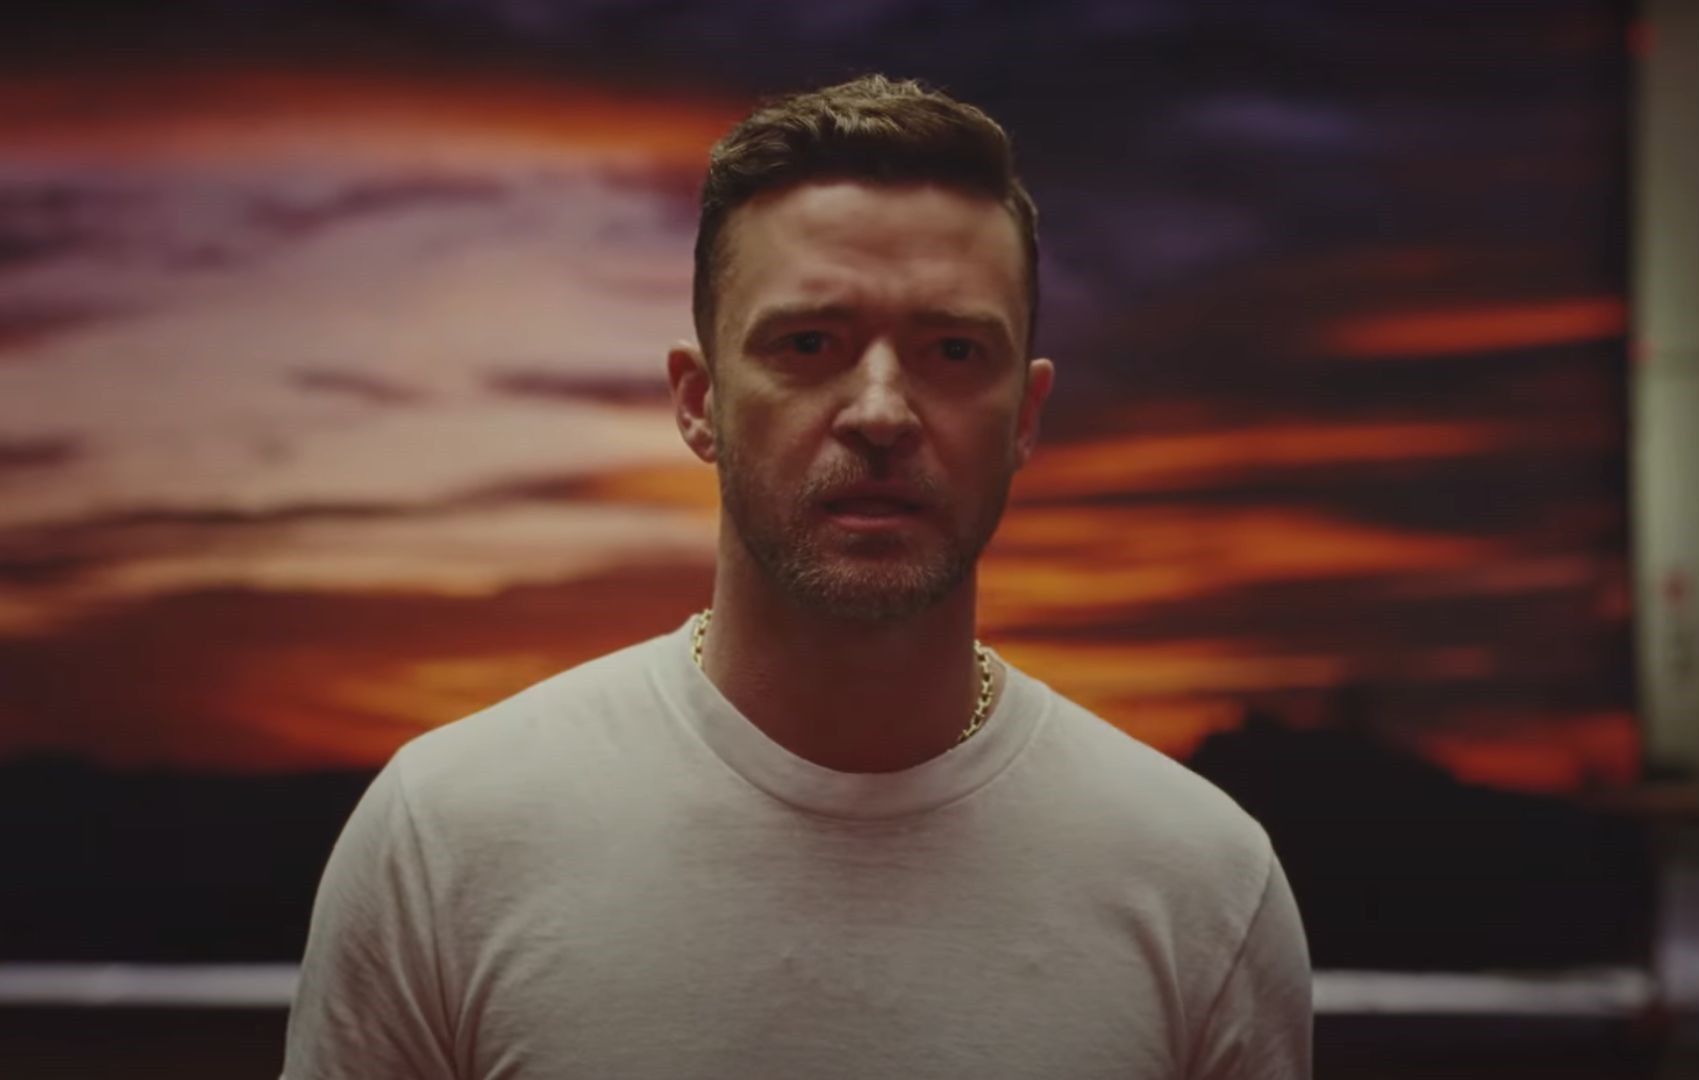 'Selfish': Justin Timberlake releases first solo single in nearly 6 years